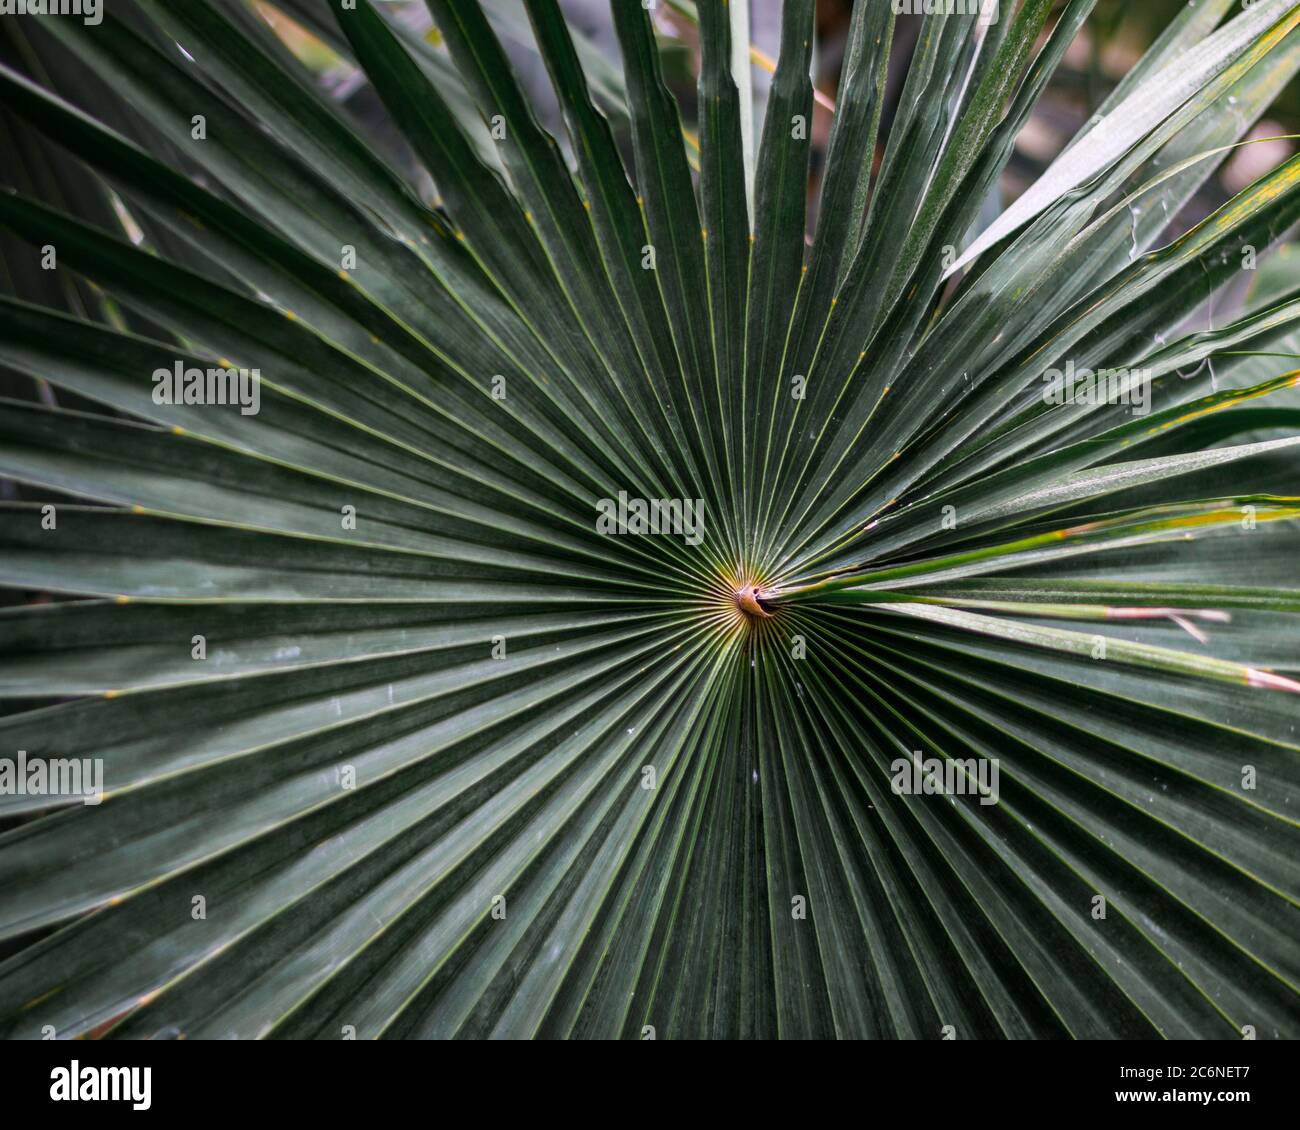 Fan leaf of a sabal palm, cabbage palmetto. Stock Photo